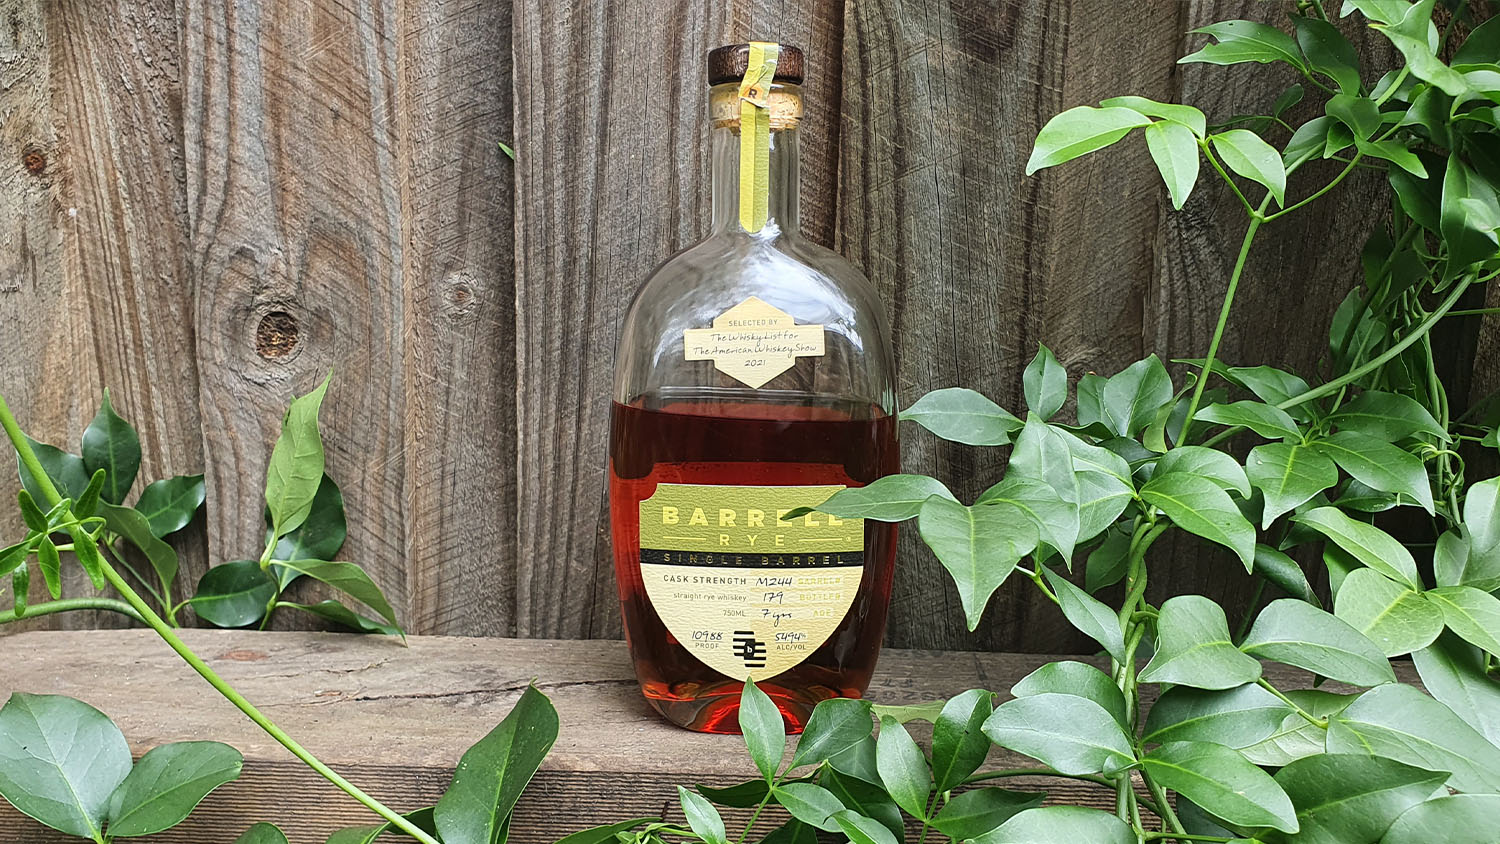 Barrell 7 Year Old Rye - Whisky List Exclusive Review